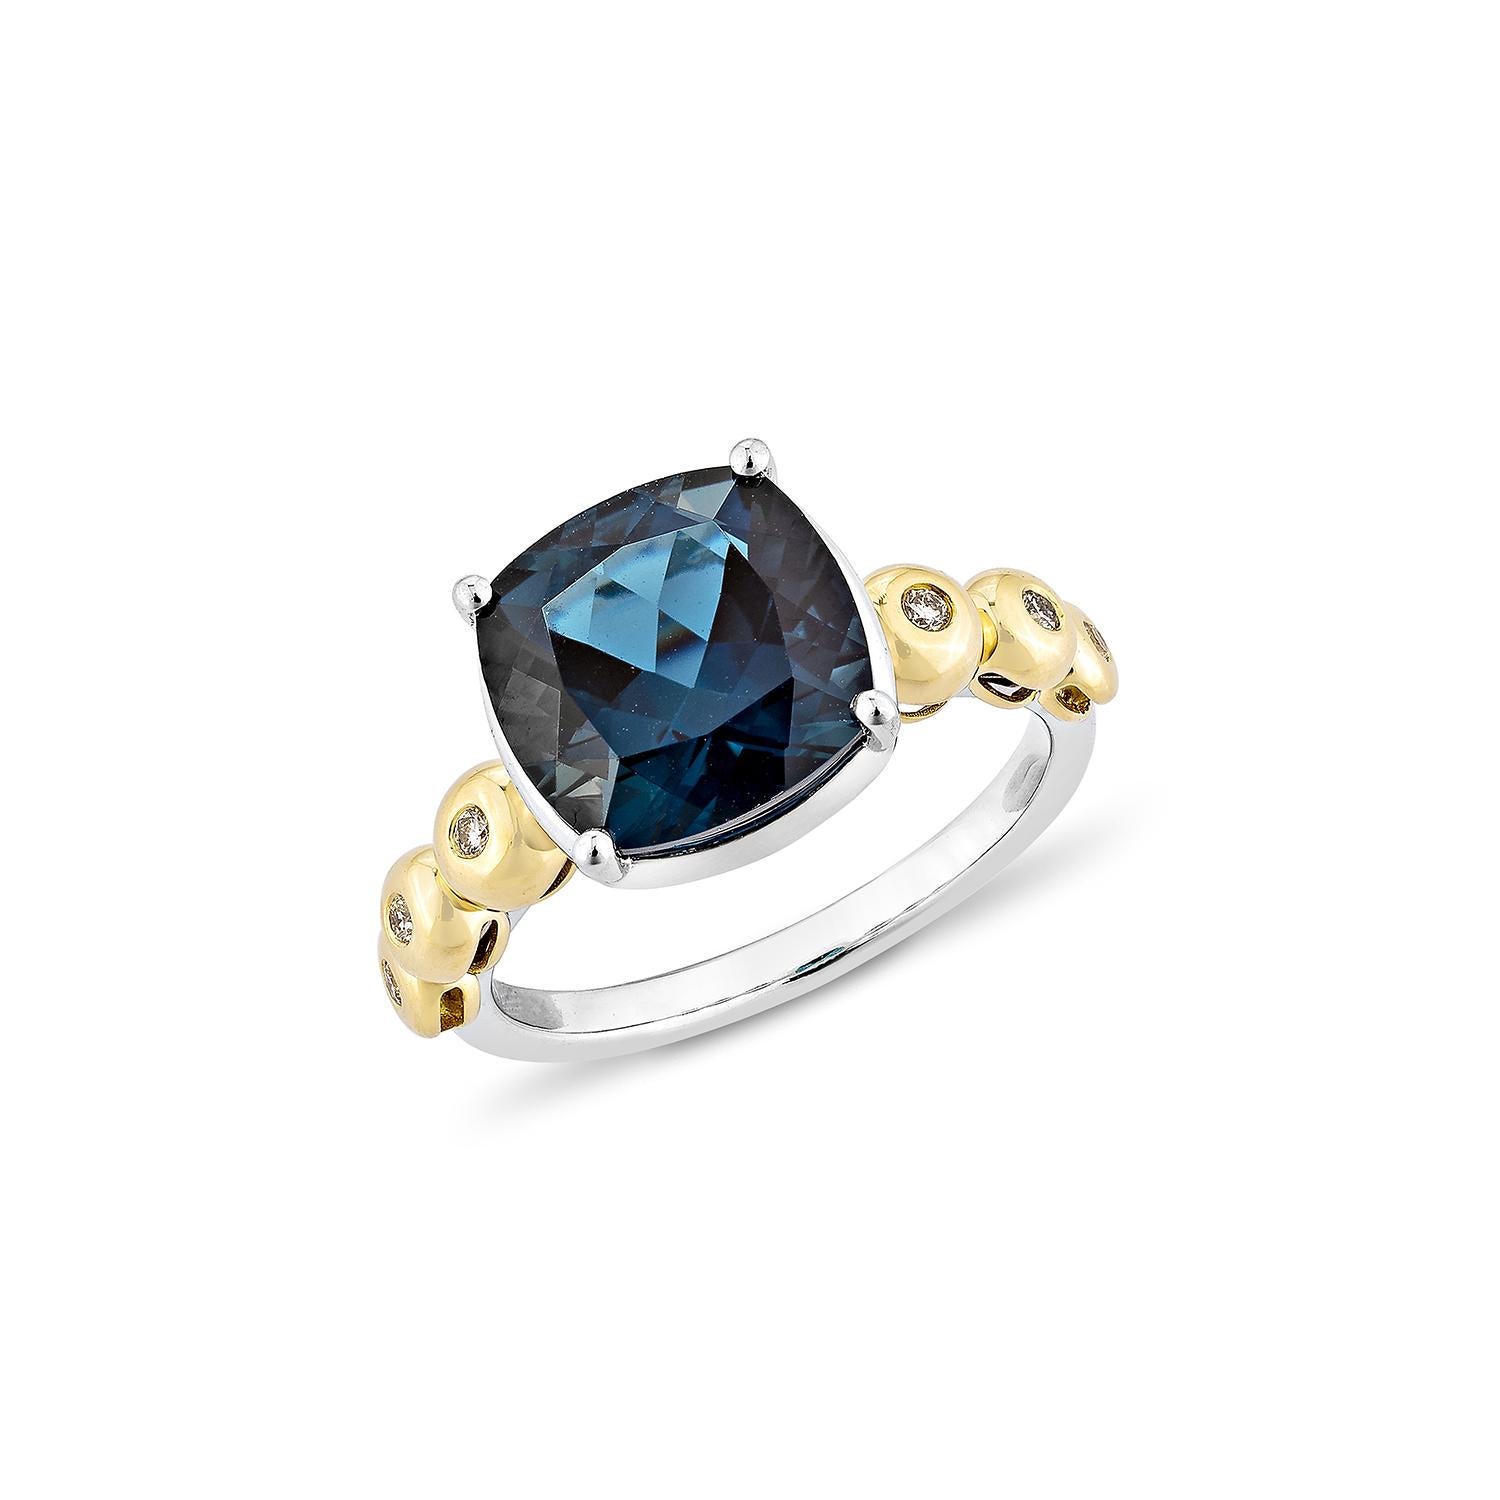 Contemporary 4.77 Carat London Blue Topaz Fancy Ring in 18KWYG with White Diamond. For Sale